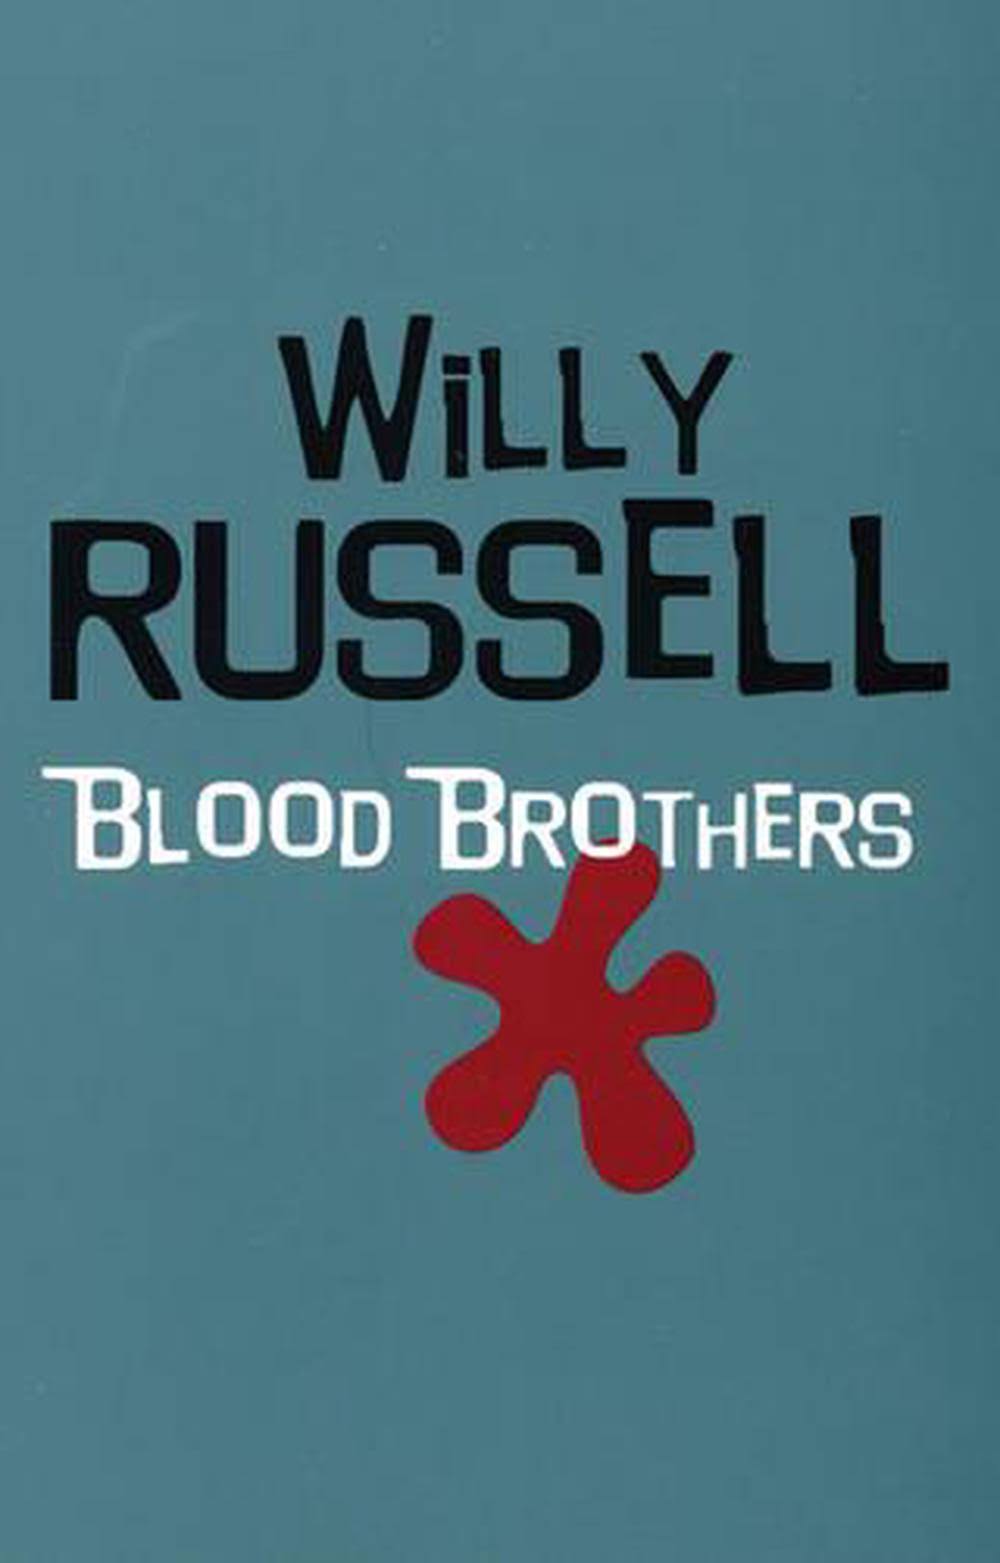 Blood Brothers [Book]